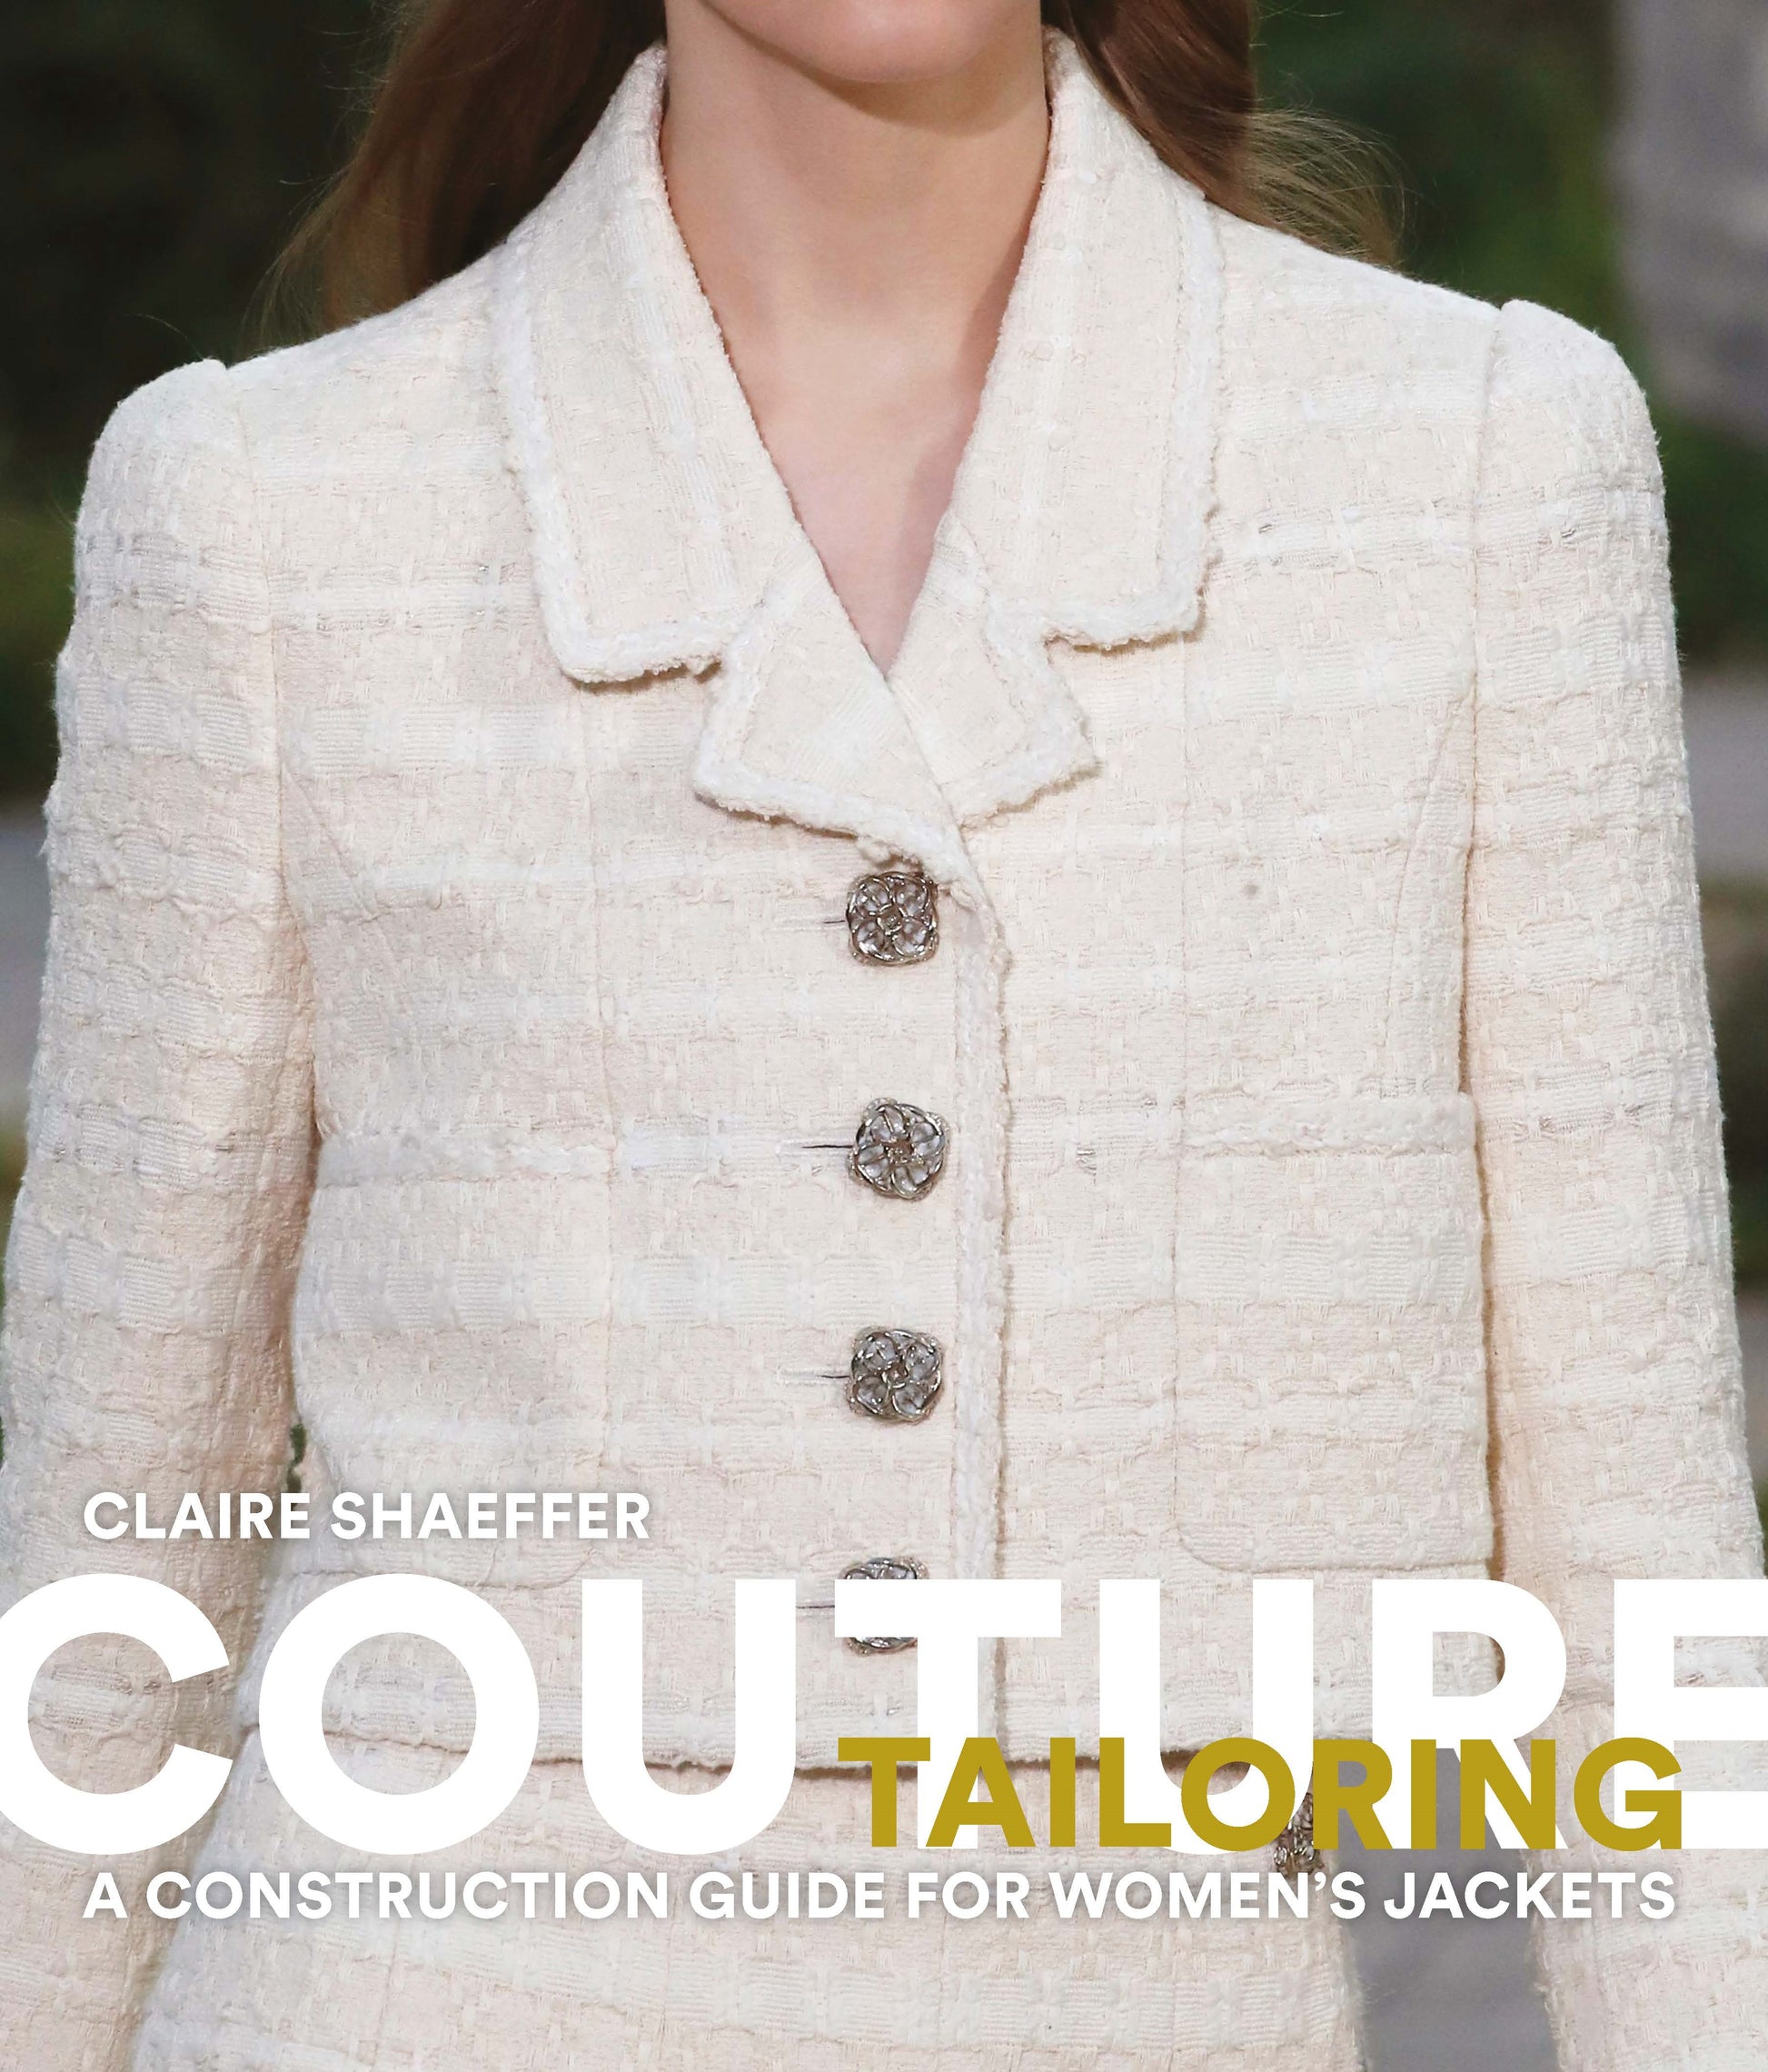 Couture Tailoring by Claire Shaeffer